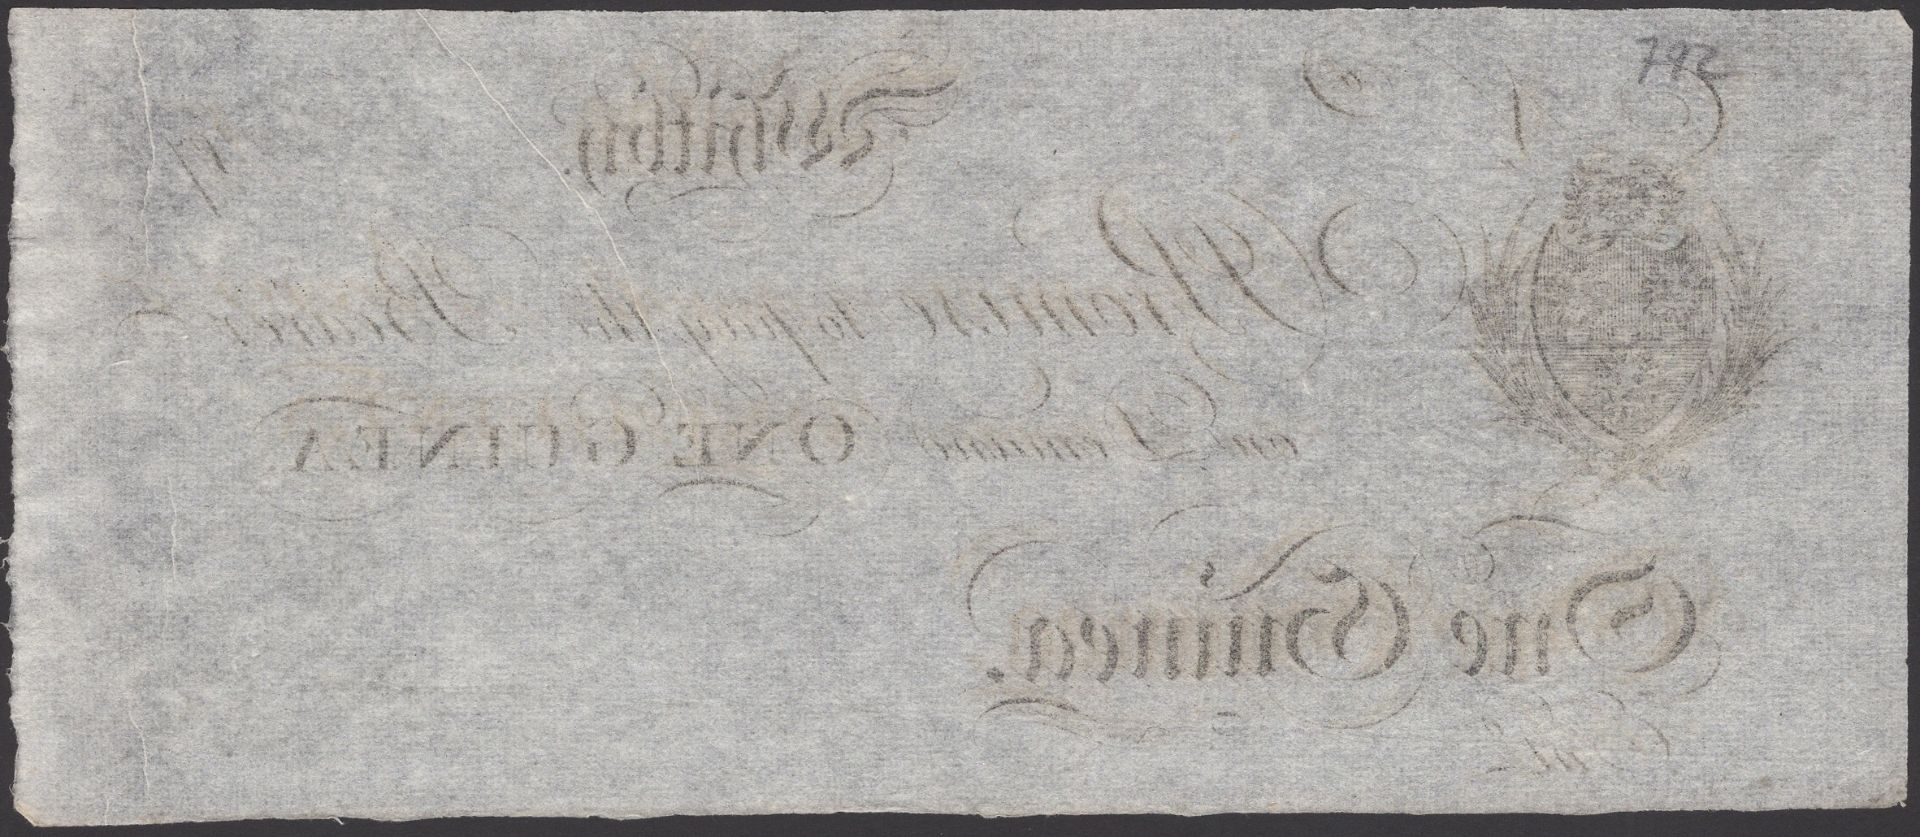 Whitby Bank, for Jonathan Sanders, unissued 5 Guineas, 17-, no serial number or signature, e... - Image 2 of 2